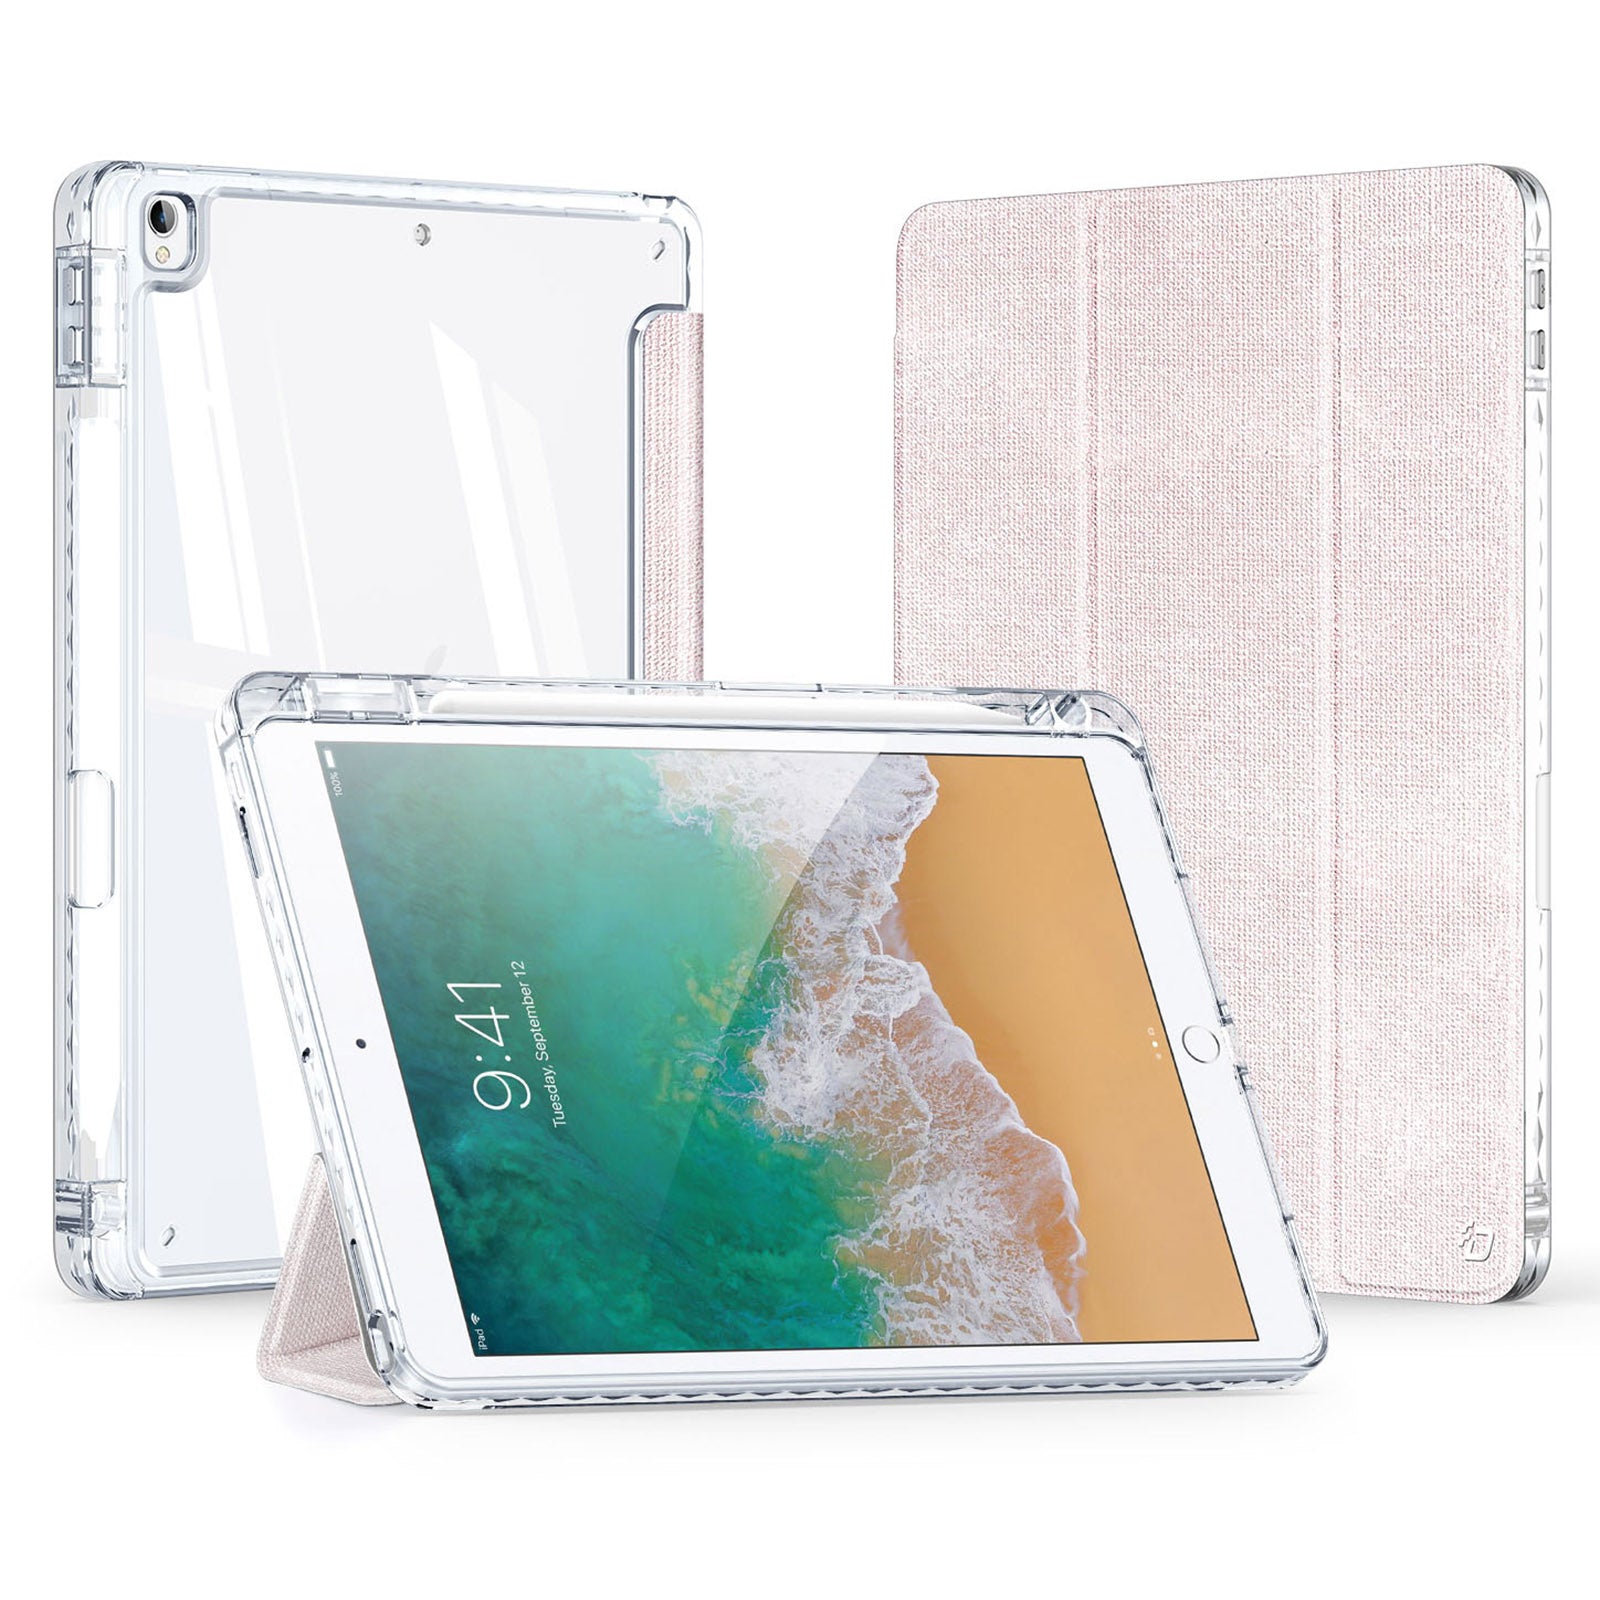 DUX DUCIS Unid Series For iPad 10.2 (2021) / (2020) / (2019) / iPad Air 10.5 inch (2019) / Pro 10.5-inch (2017) Leather Case Clear Back Cover - Light Pink